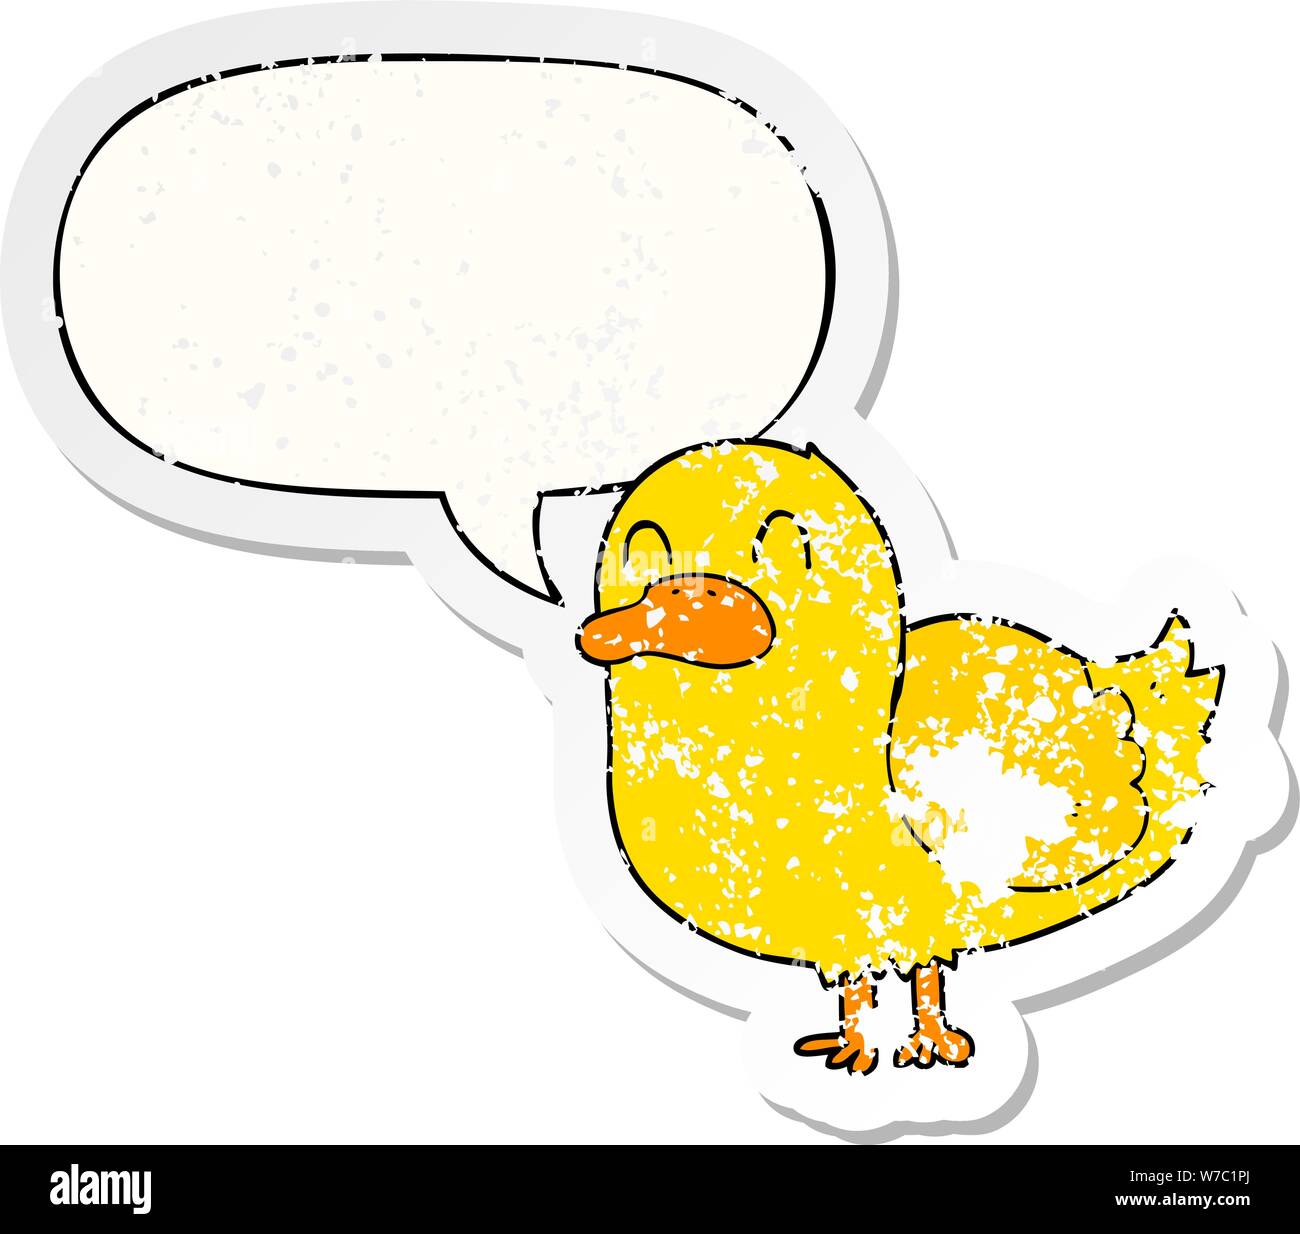 Funny cartoon duck speech bubble Stock Vector Images - Page 2 - Alamy